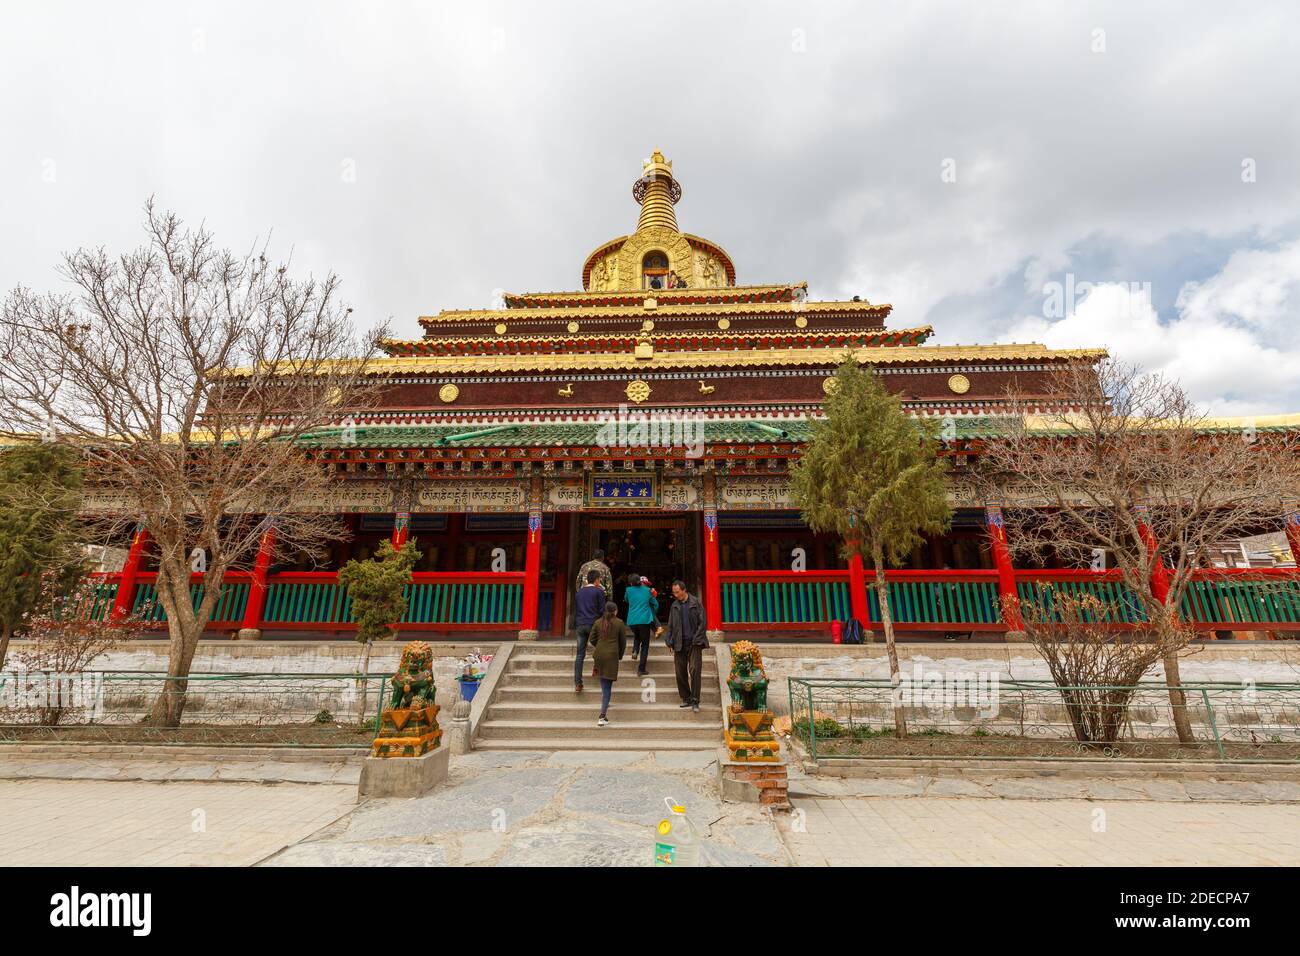 Xiahe, Gansu Province / China - April 28, 2017: Front view of Gongtang Pagoda at Labrang Monastery. Temple building with richly ornamented rooftop. Stock Photo